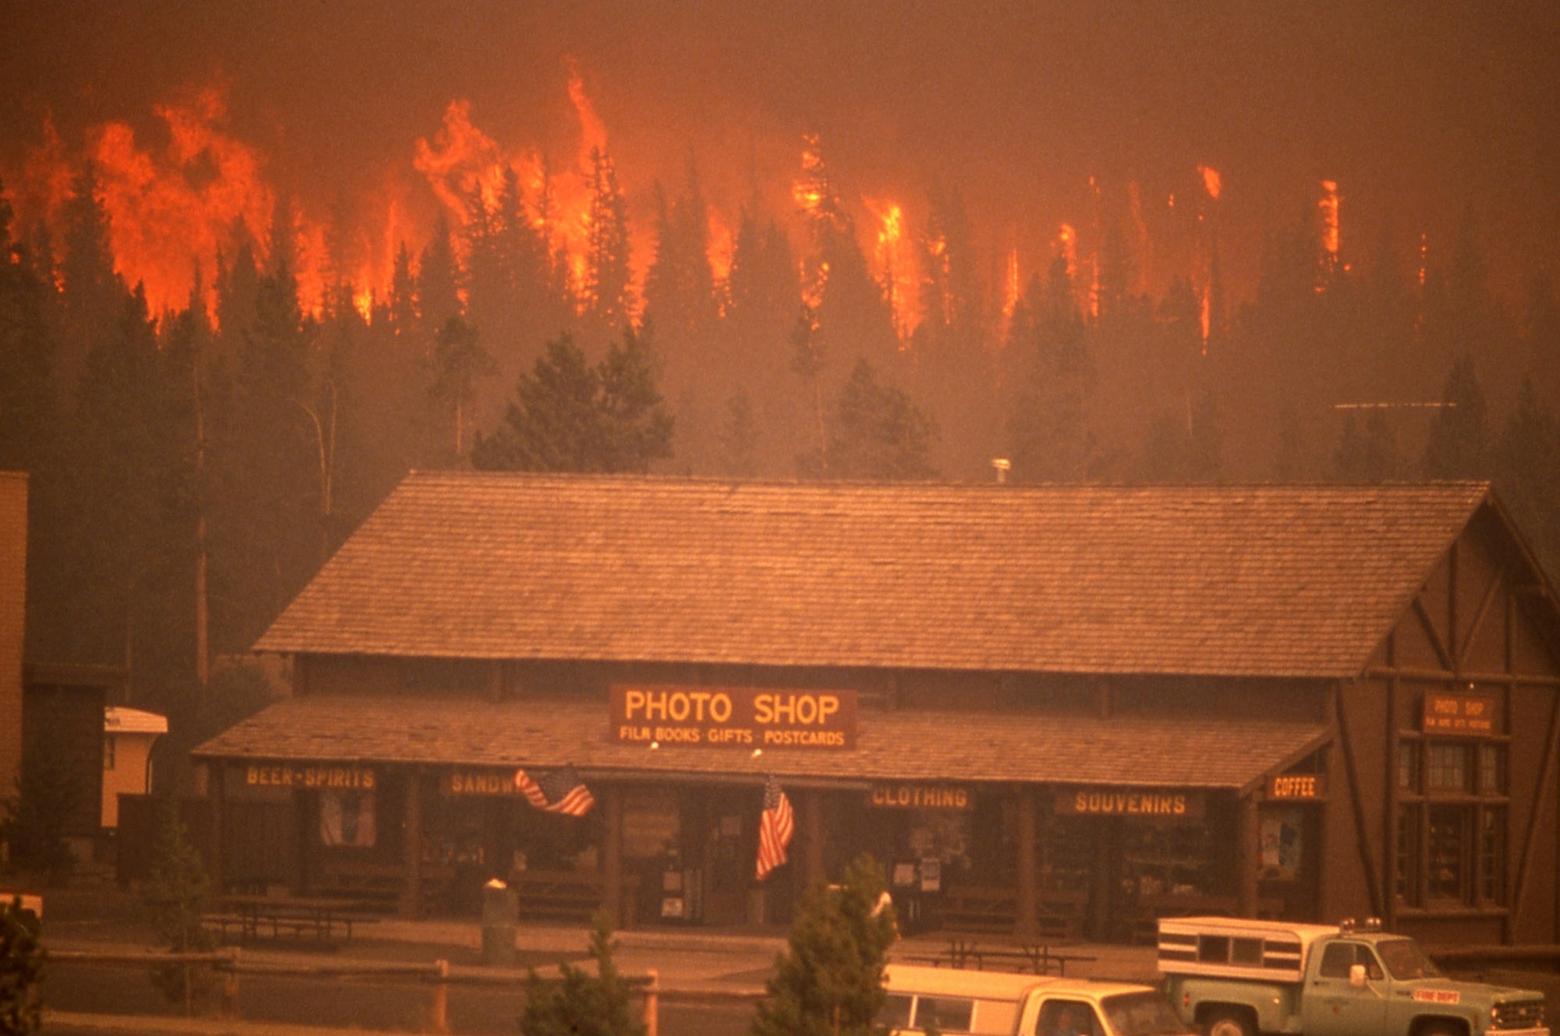 A cautionary tale: In the summer of 1988, winds gusting upwards of 80 mph fanned wildfires that burned nearly 800,000 acres in Yellowstone National Park. Here, a crowning North Fork Fire approaches the Old Faithful Inn complex and its Photo Shop. Photo by Jeff Henry/NPS